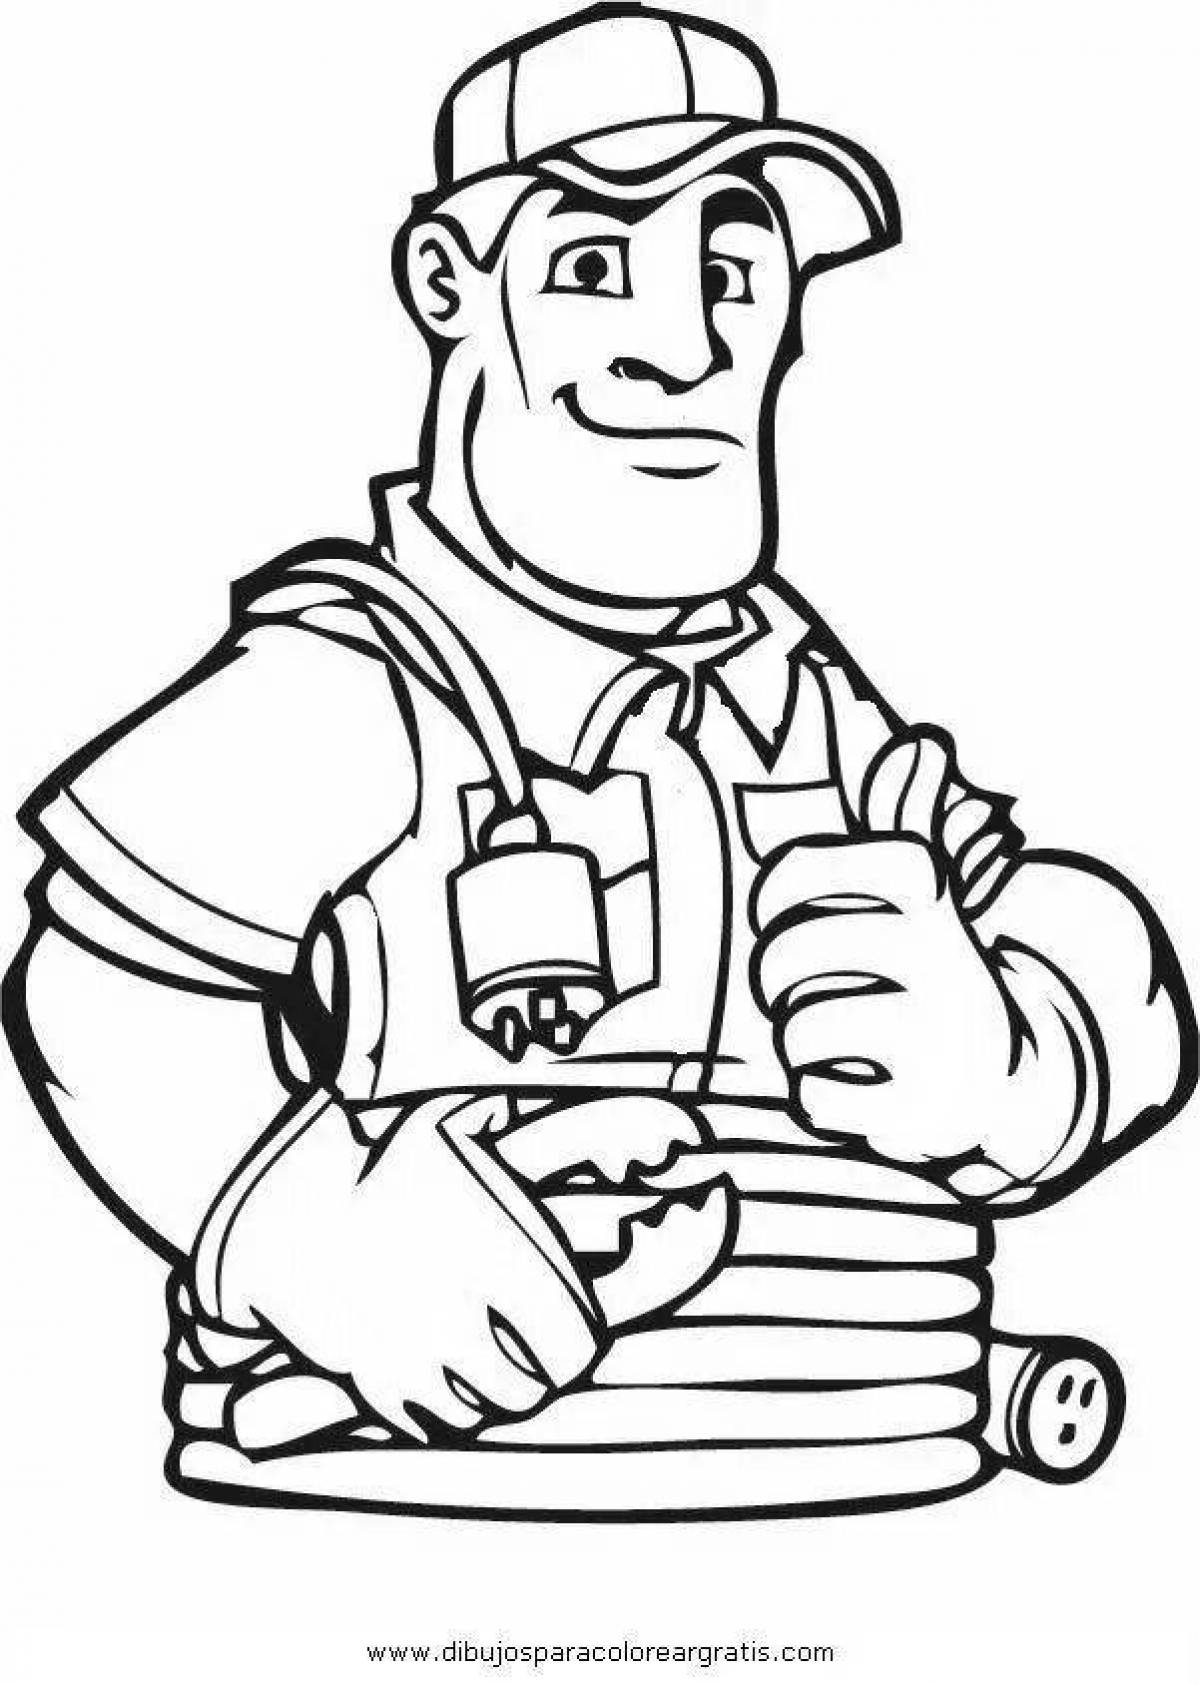 Exciting electrician coloring book